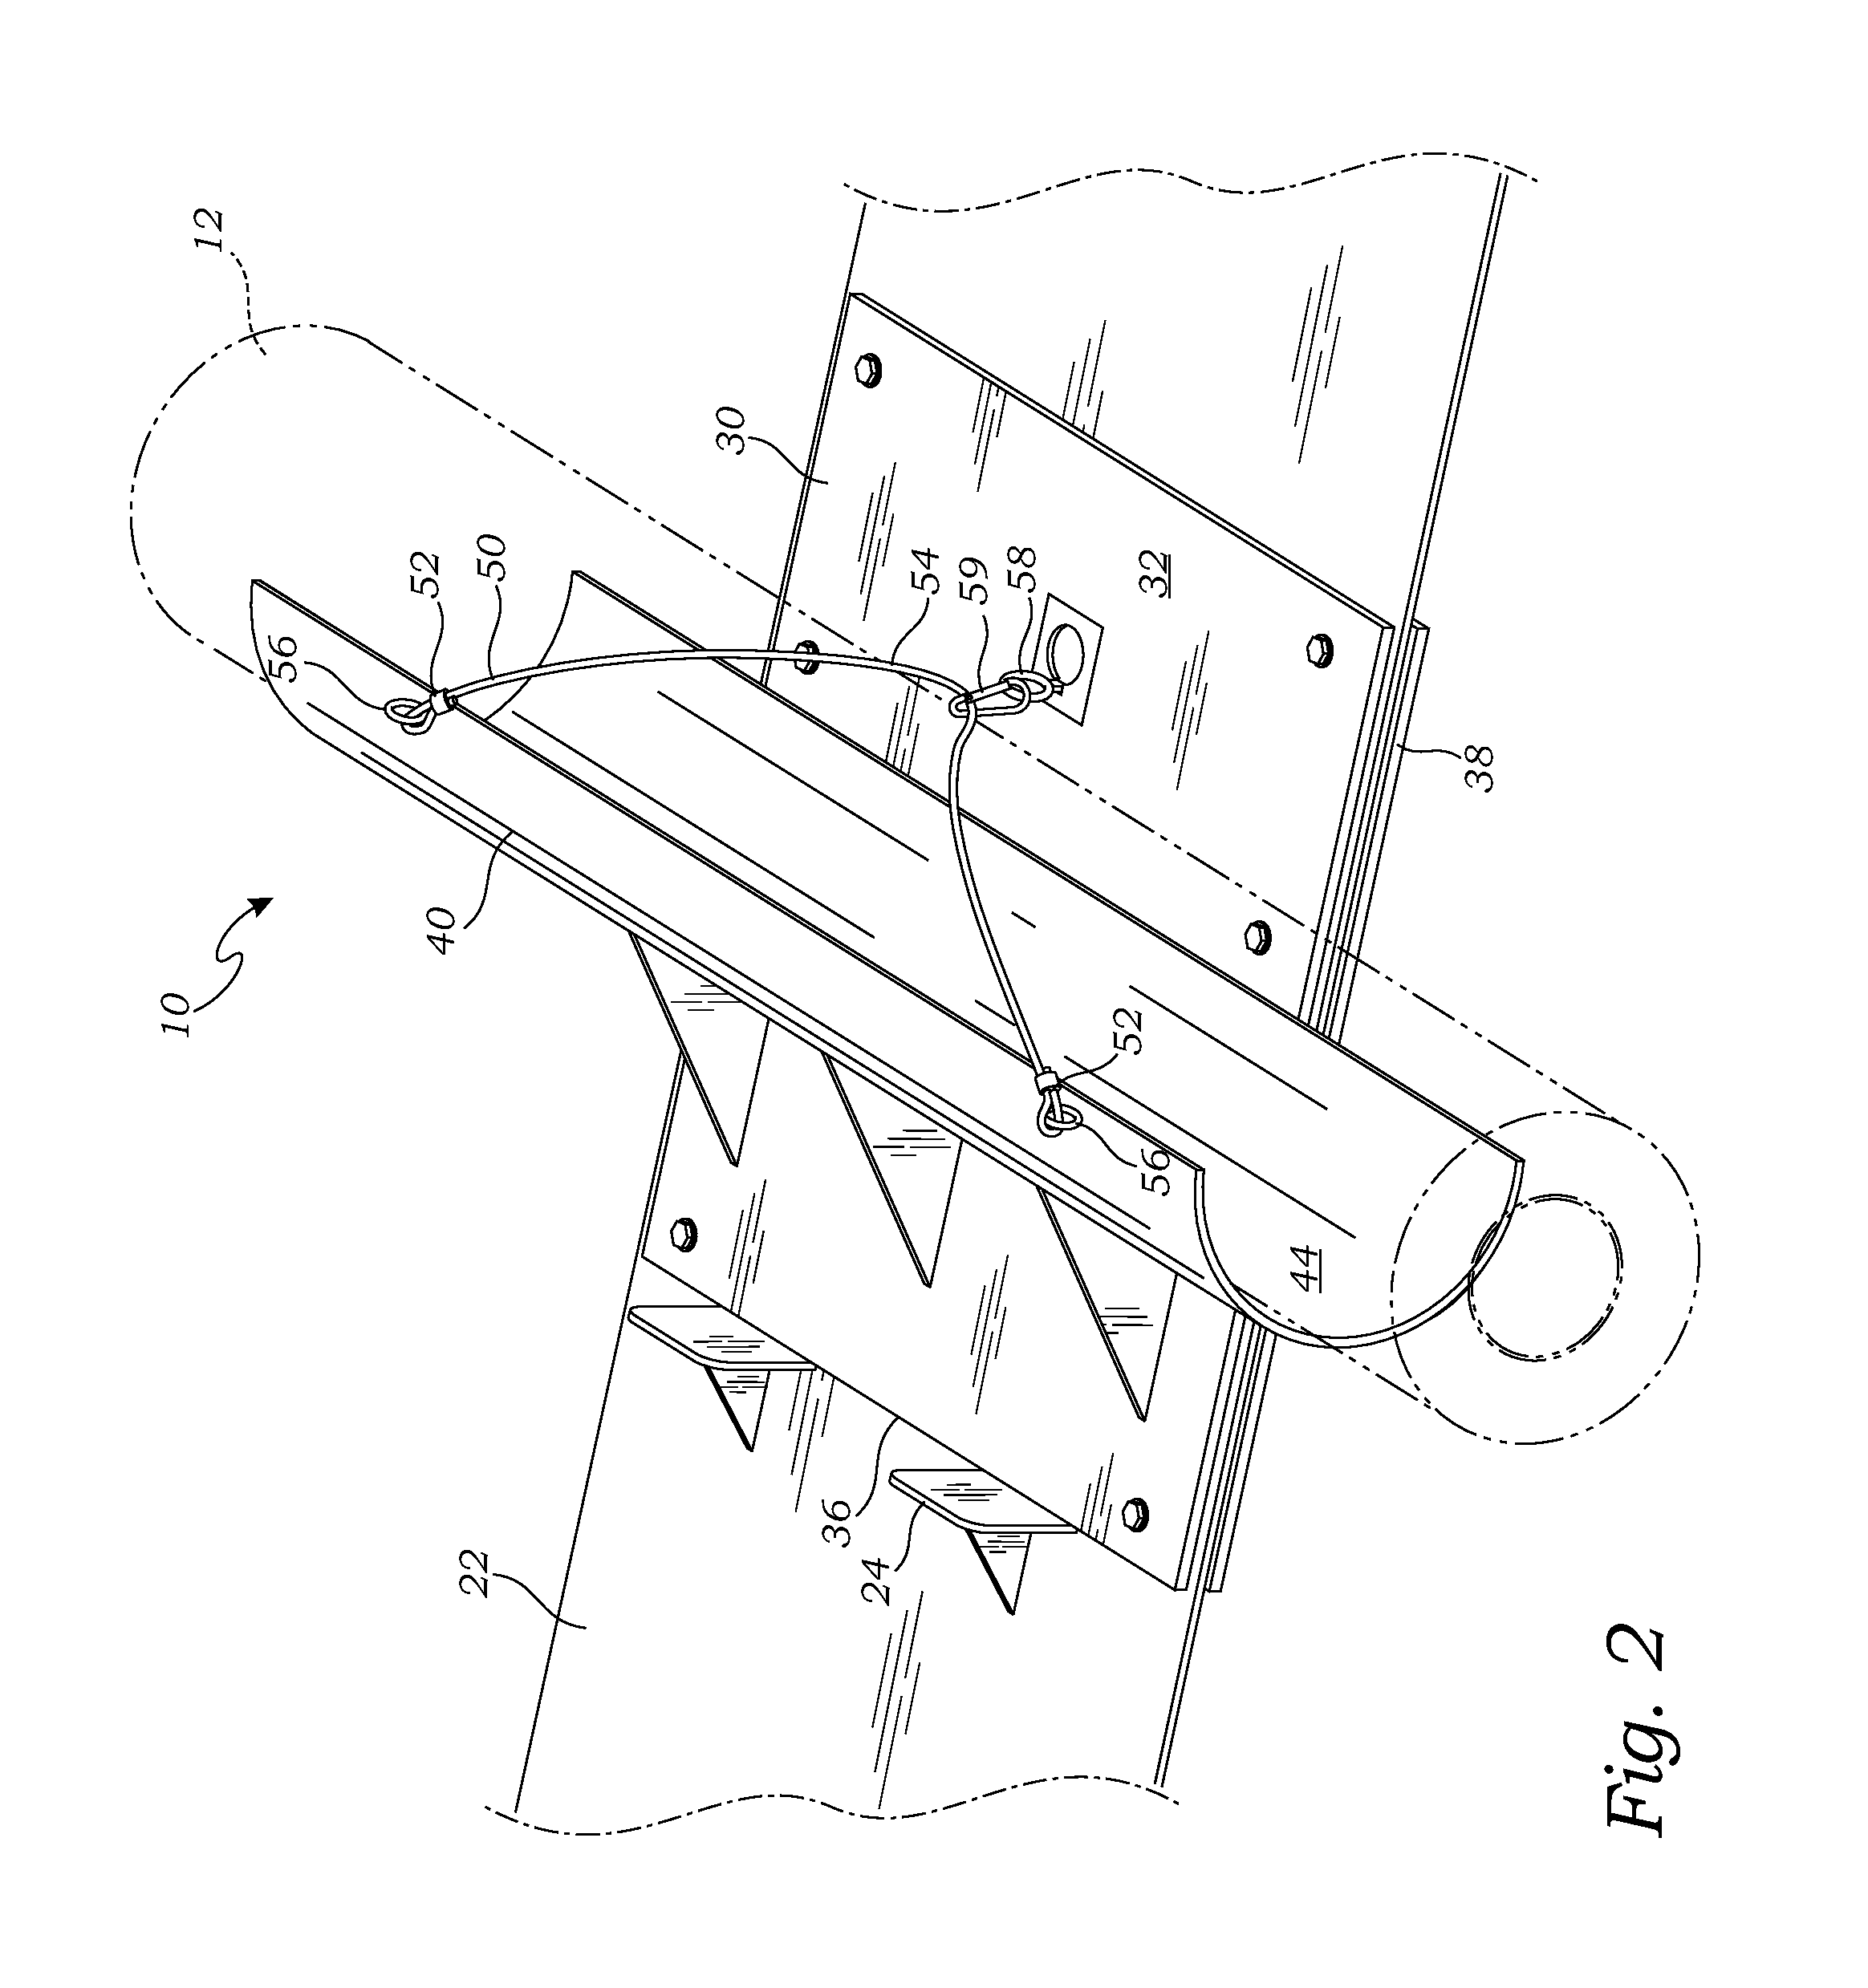 Loader attachment for use with a mobile conveyor system